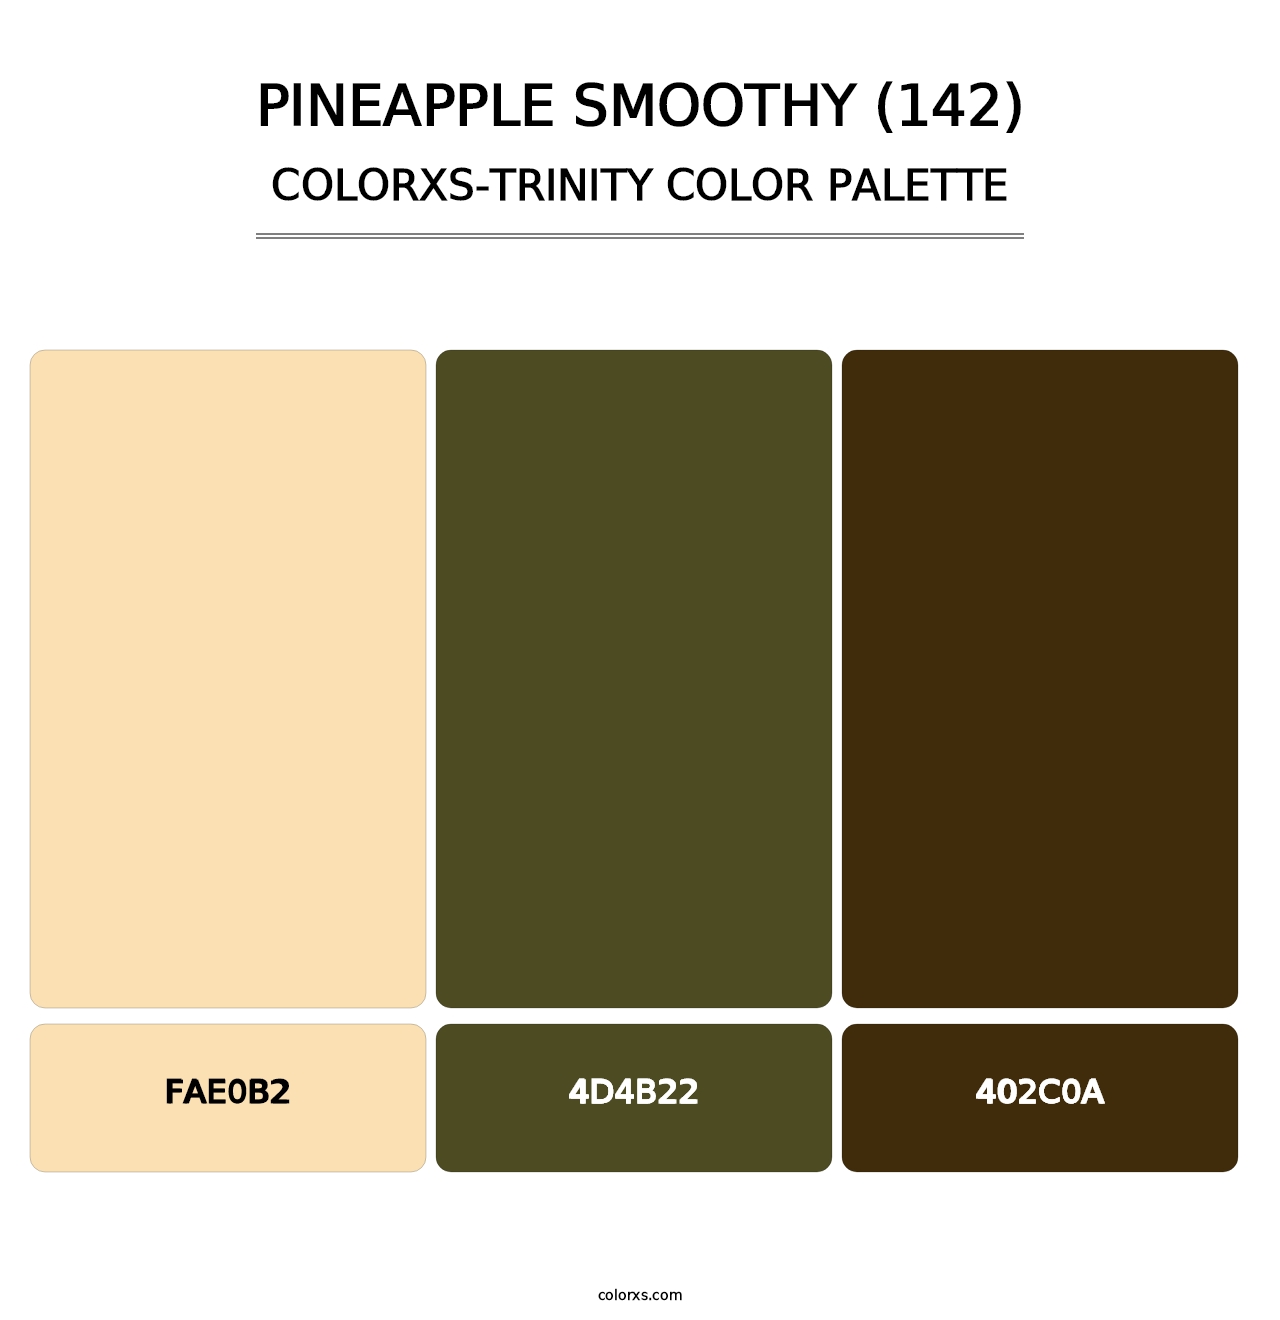 Pineapple Smoothy (142) - Colorxs Trinity Palette